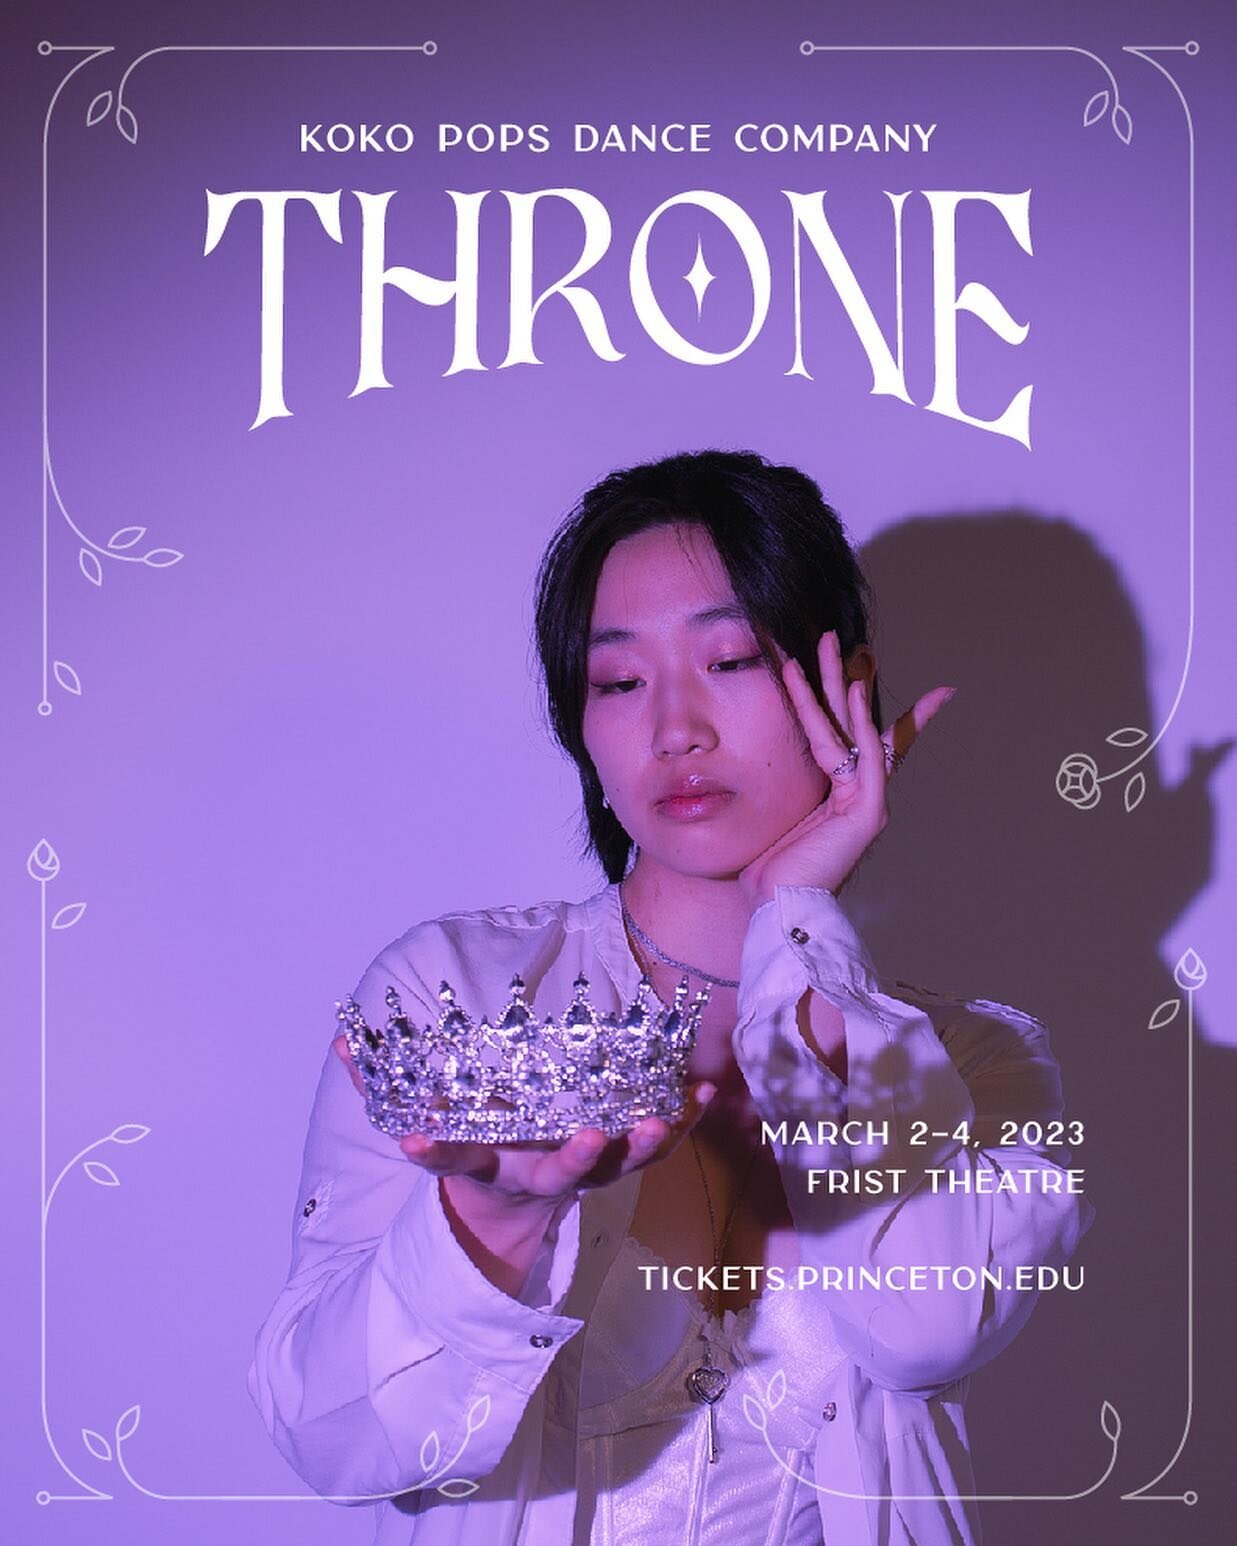 Closing night! We can&rsquo;t wait to perform for our two SOLD OUT crowds!! See you all tonight! 💜💜

KoKo Pops presents: THRONE

Photography by @tiff._.tsai @jessicaa.dong
Design by @briantieu @clairebear_1004 @paige.min @zhu.anlon